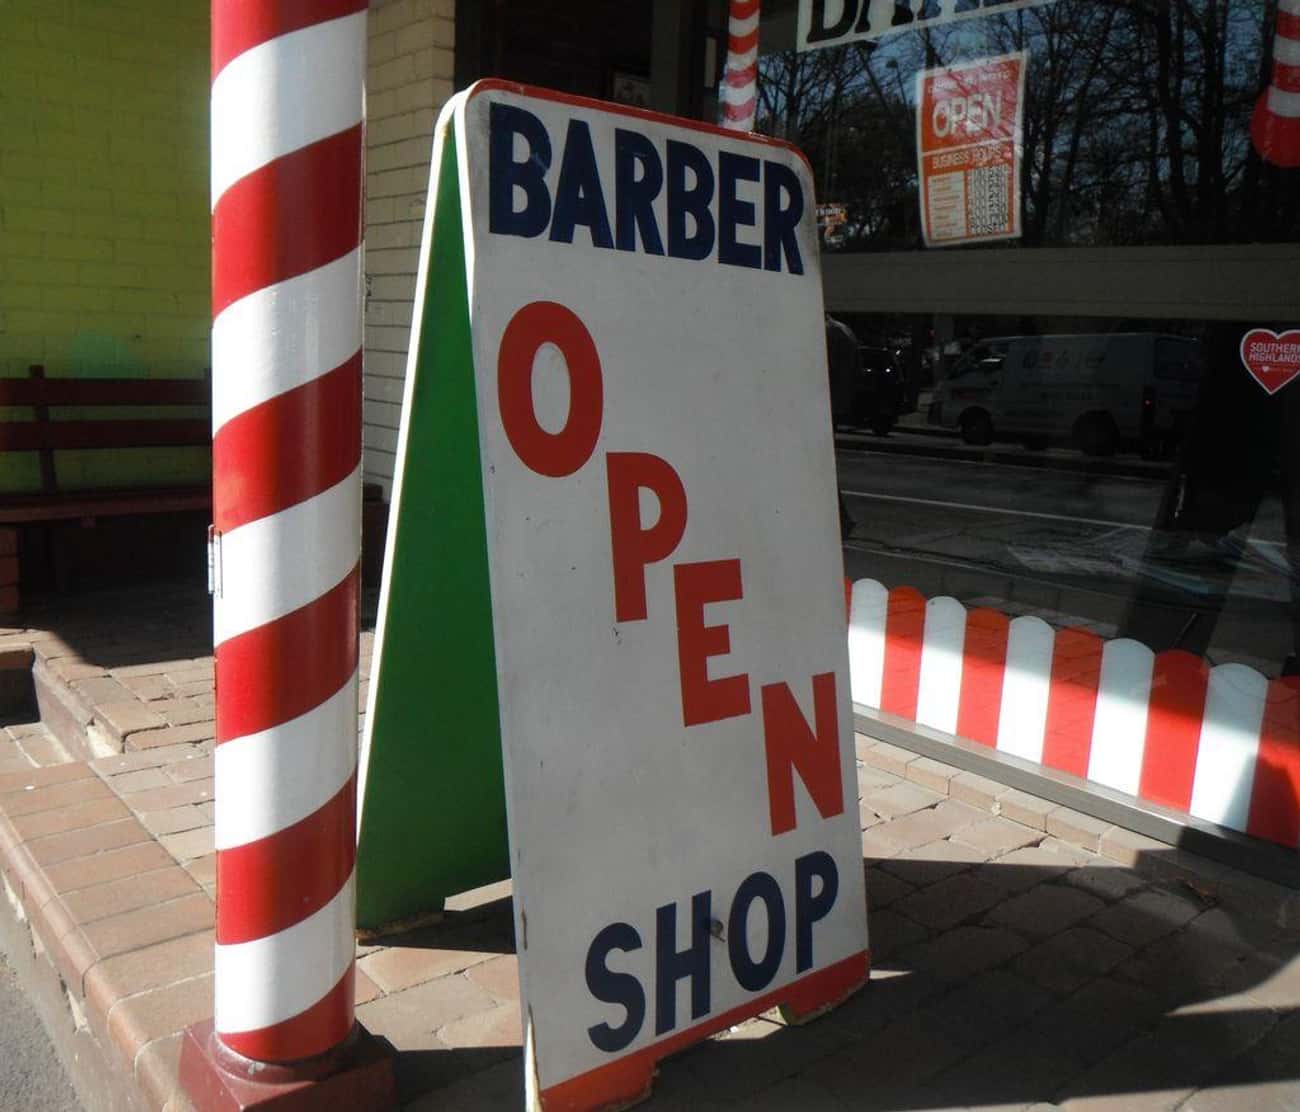 Barbers Conducted Bloodletting Procedures, Which Is Why Barber Poles Have Red Stripes